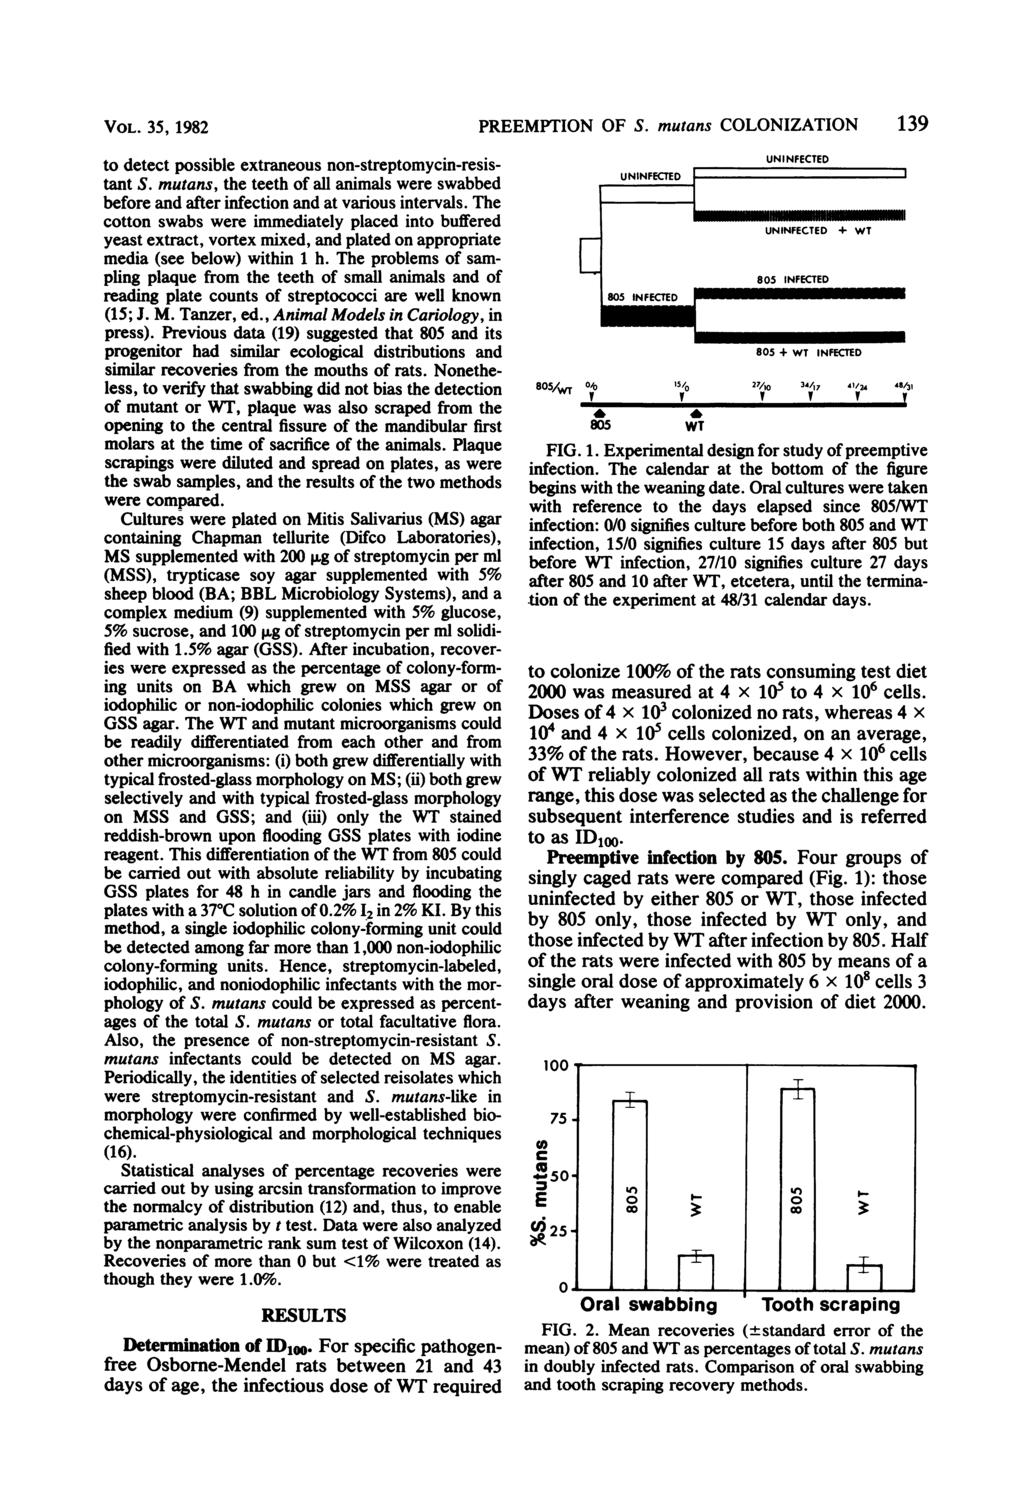 VOL. 35, 1982 to detect possible extraneous non-streptomycin-resistant S. mutans, the teeth of all animals were swabbed before and after infection and at various intervals.